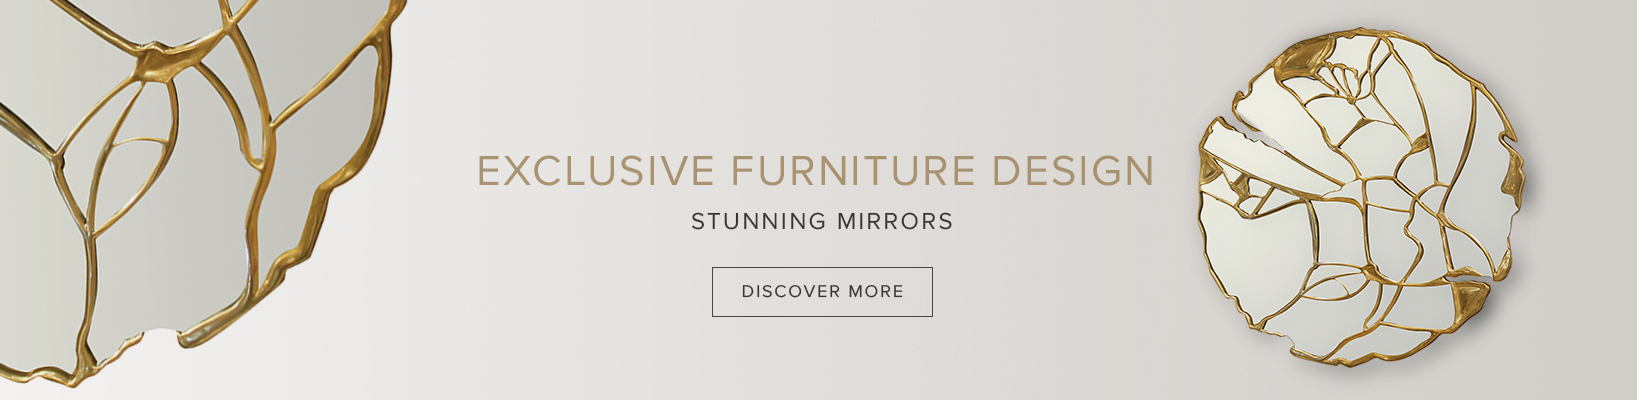 Exclusive Mirrors For Your Home Decor milan design week Milan Design Week 2019 Trend Report banners 20glance